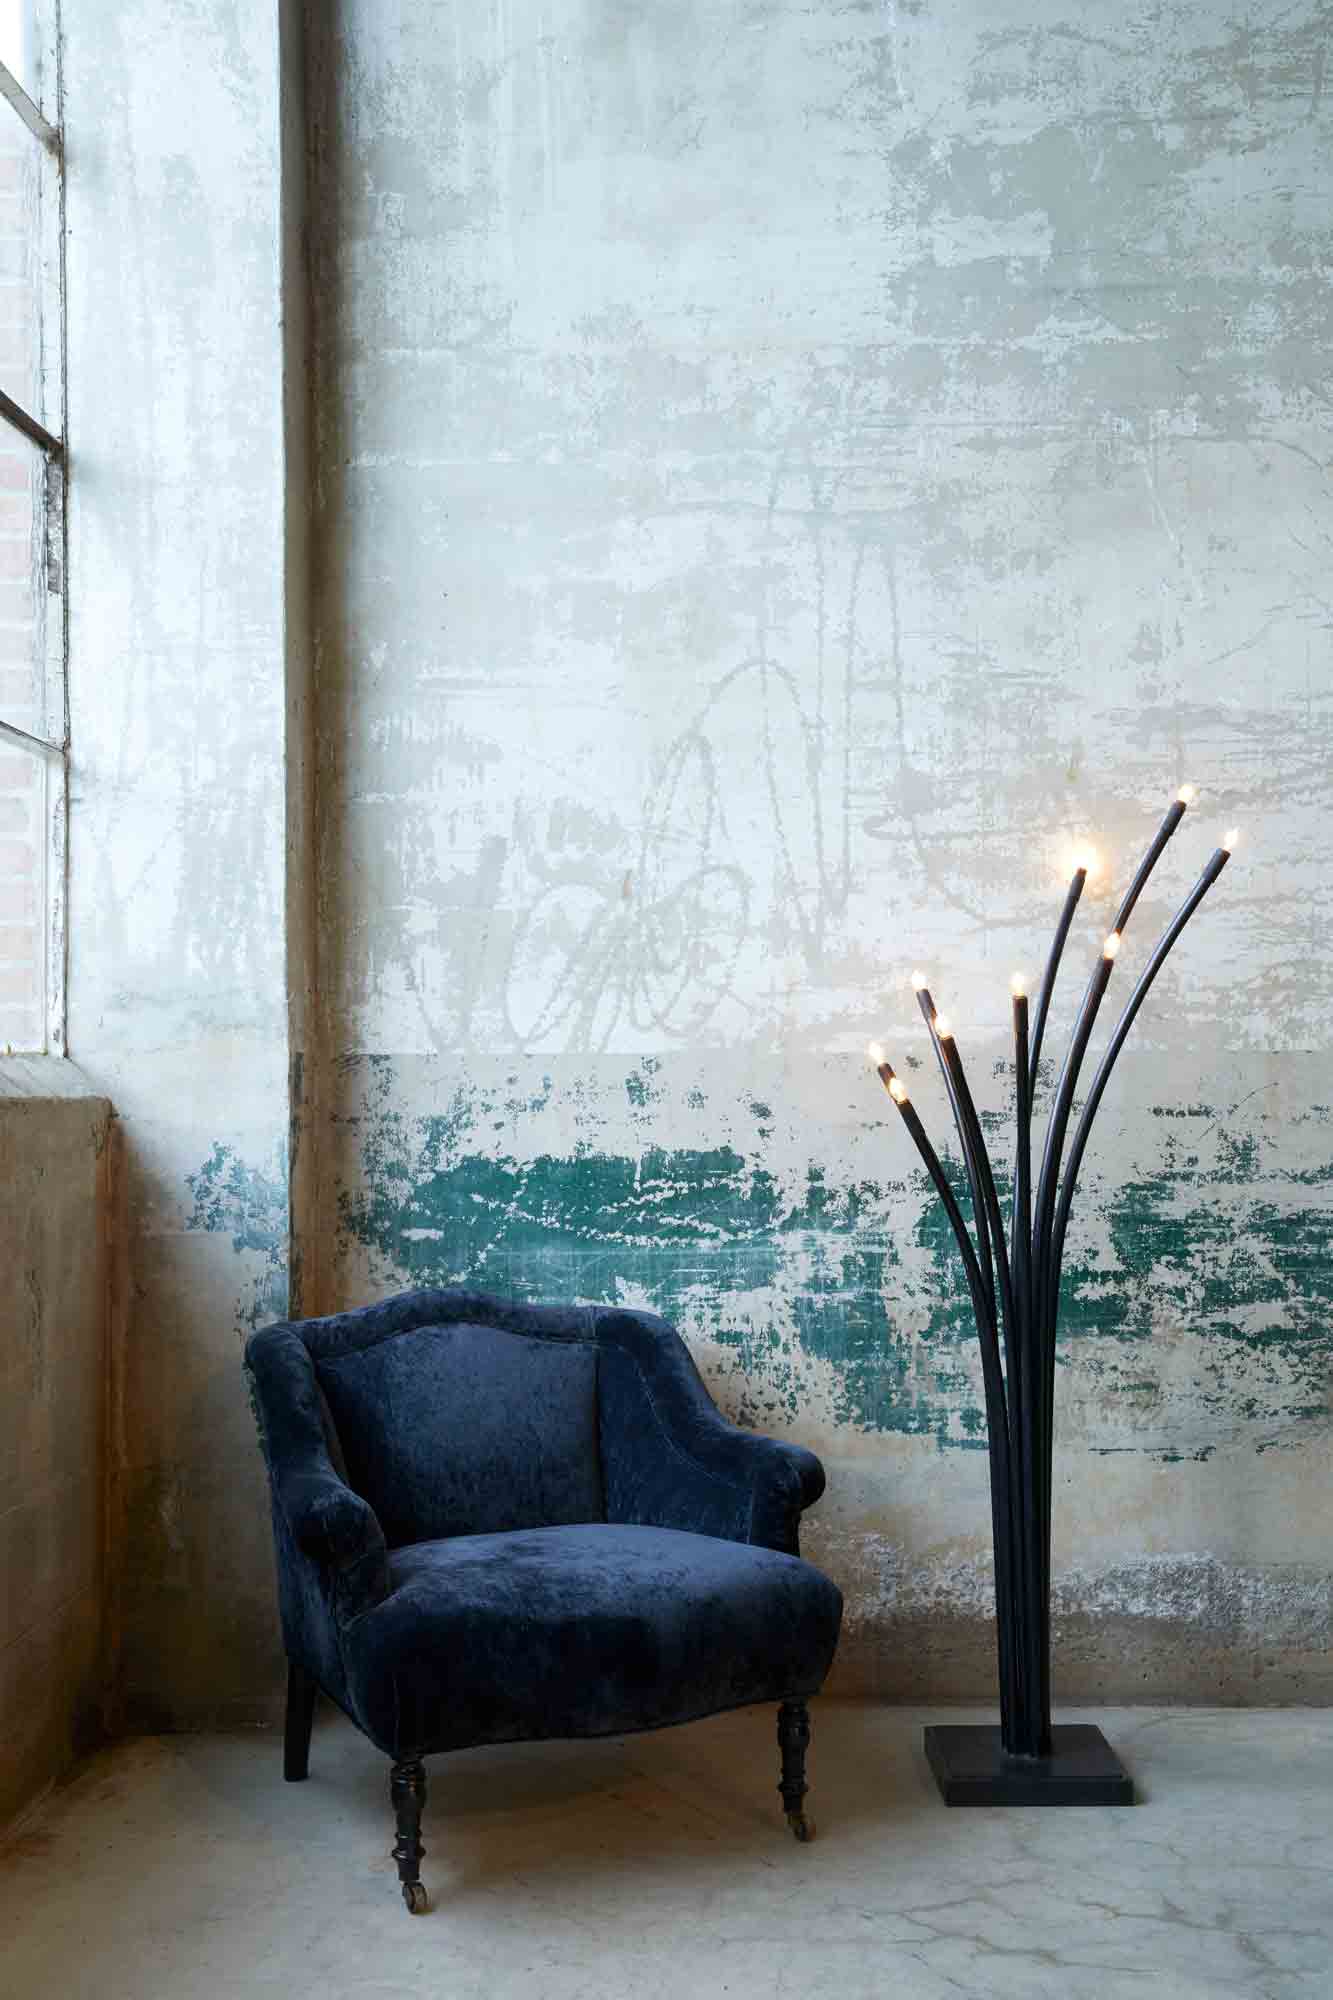  Upholstered chair in dark blue fabric with ramo floor lamp next to it , both placed against distressed brick wall and large window.  